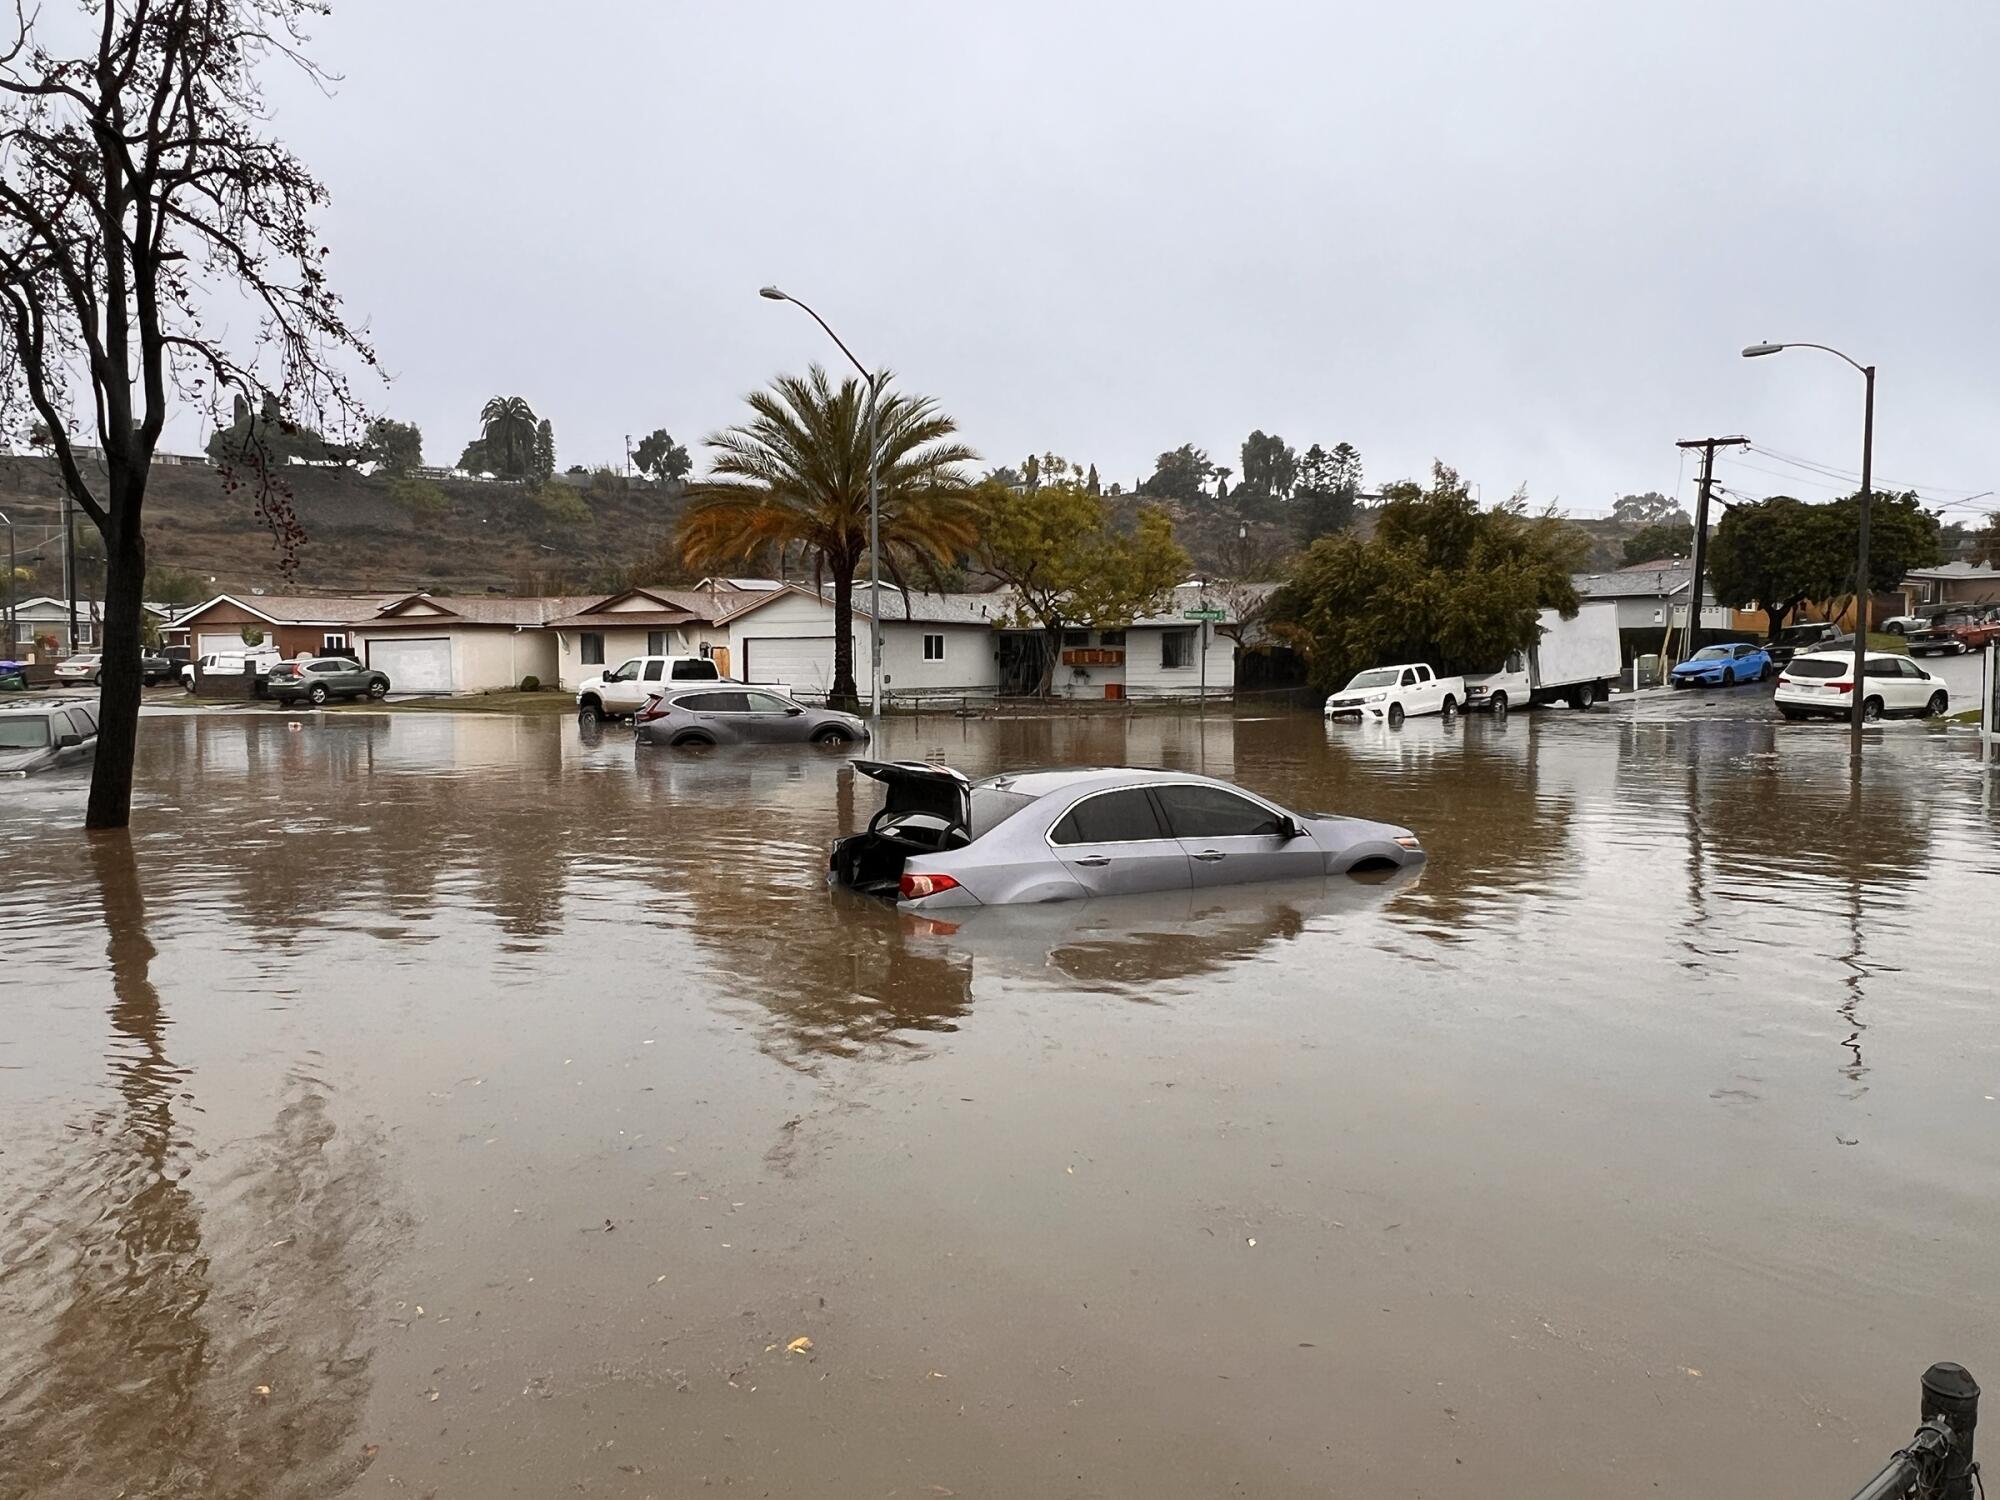 Photos Downpours, floods and rescues around San Diego The San Diego